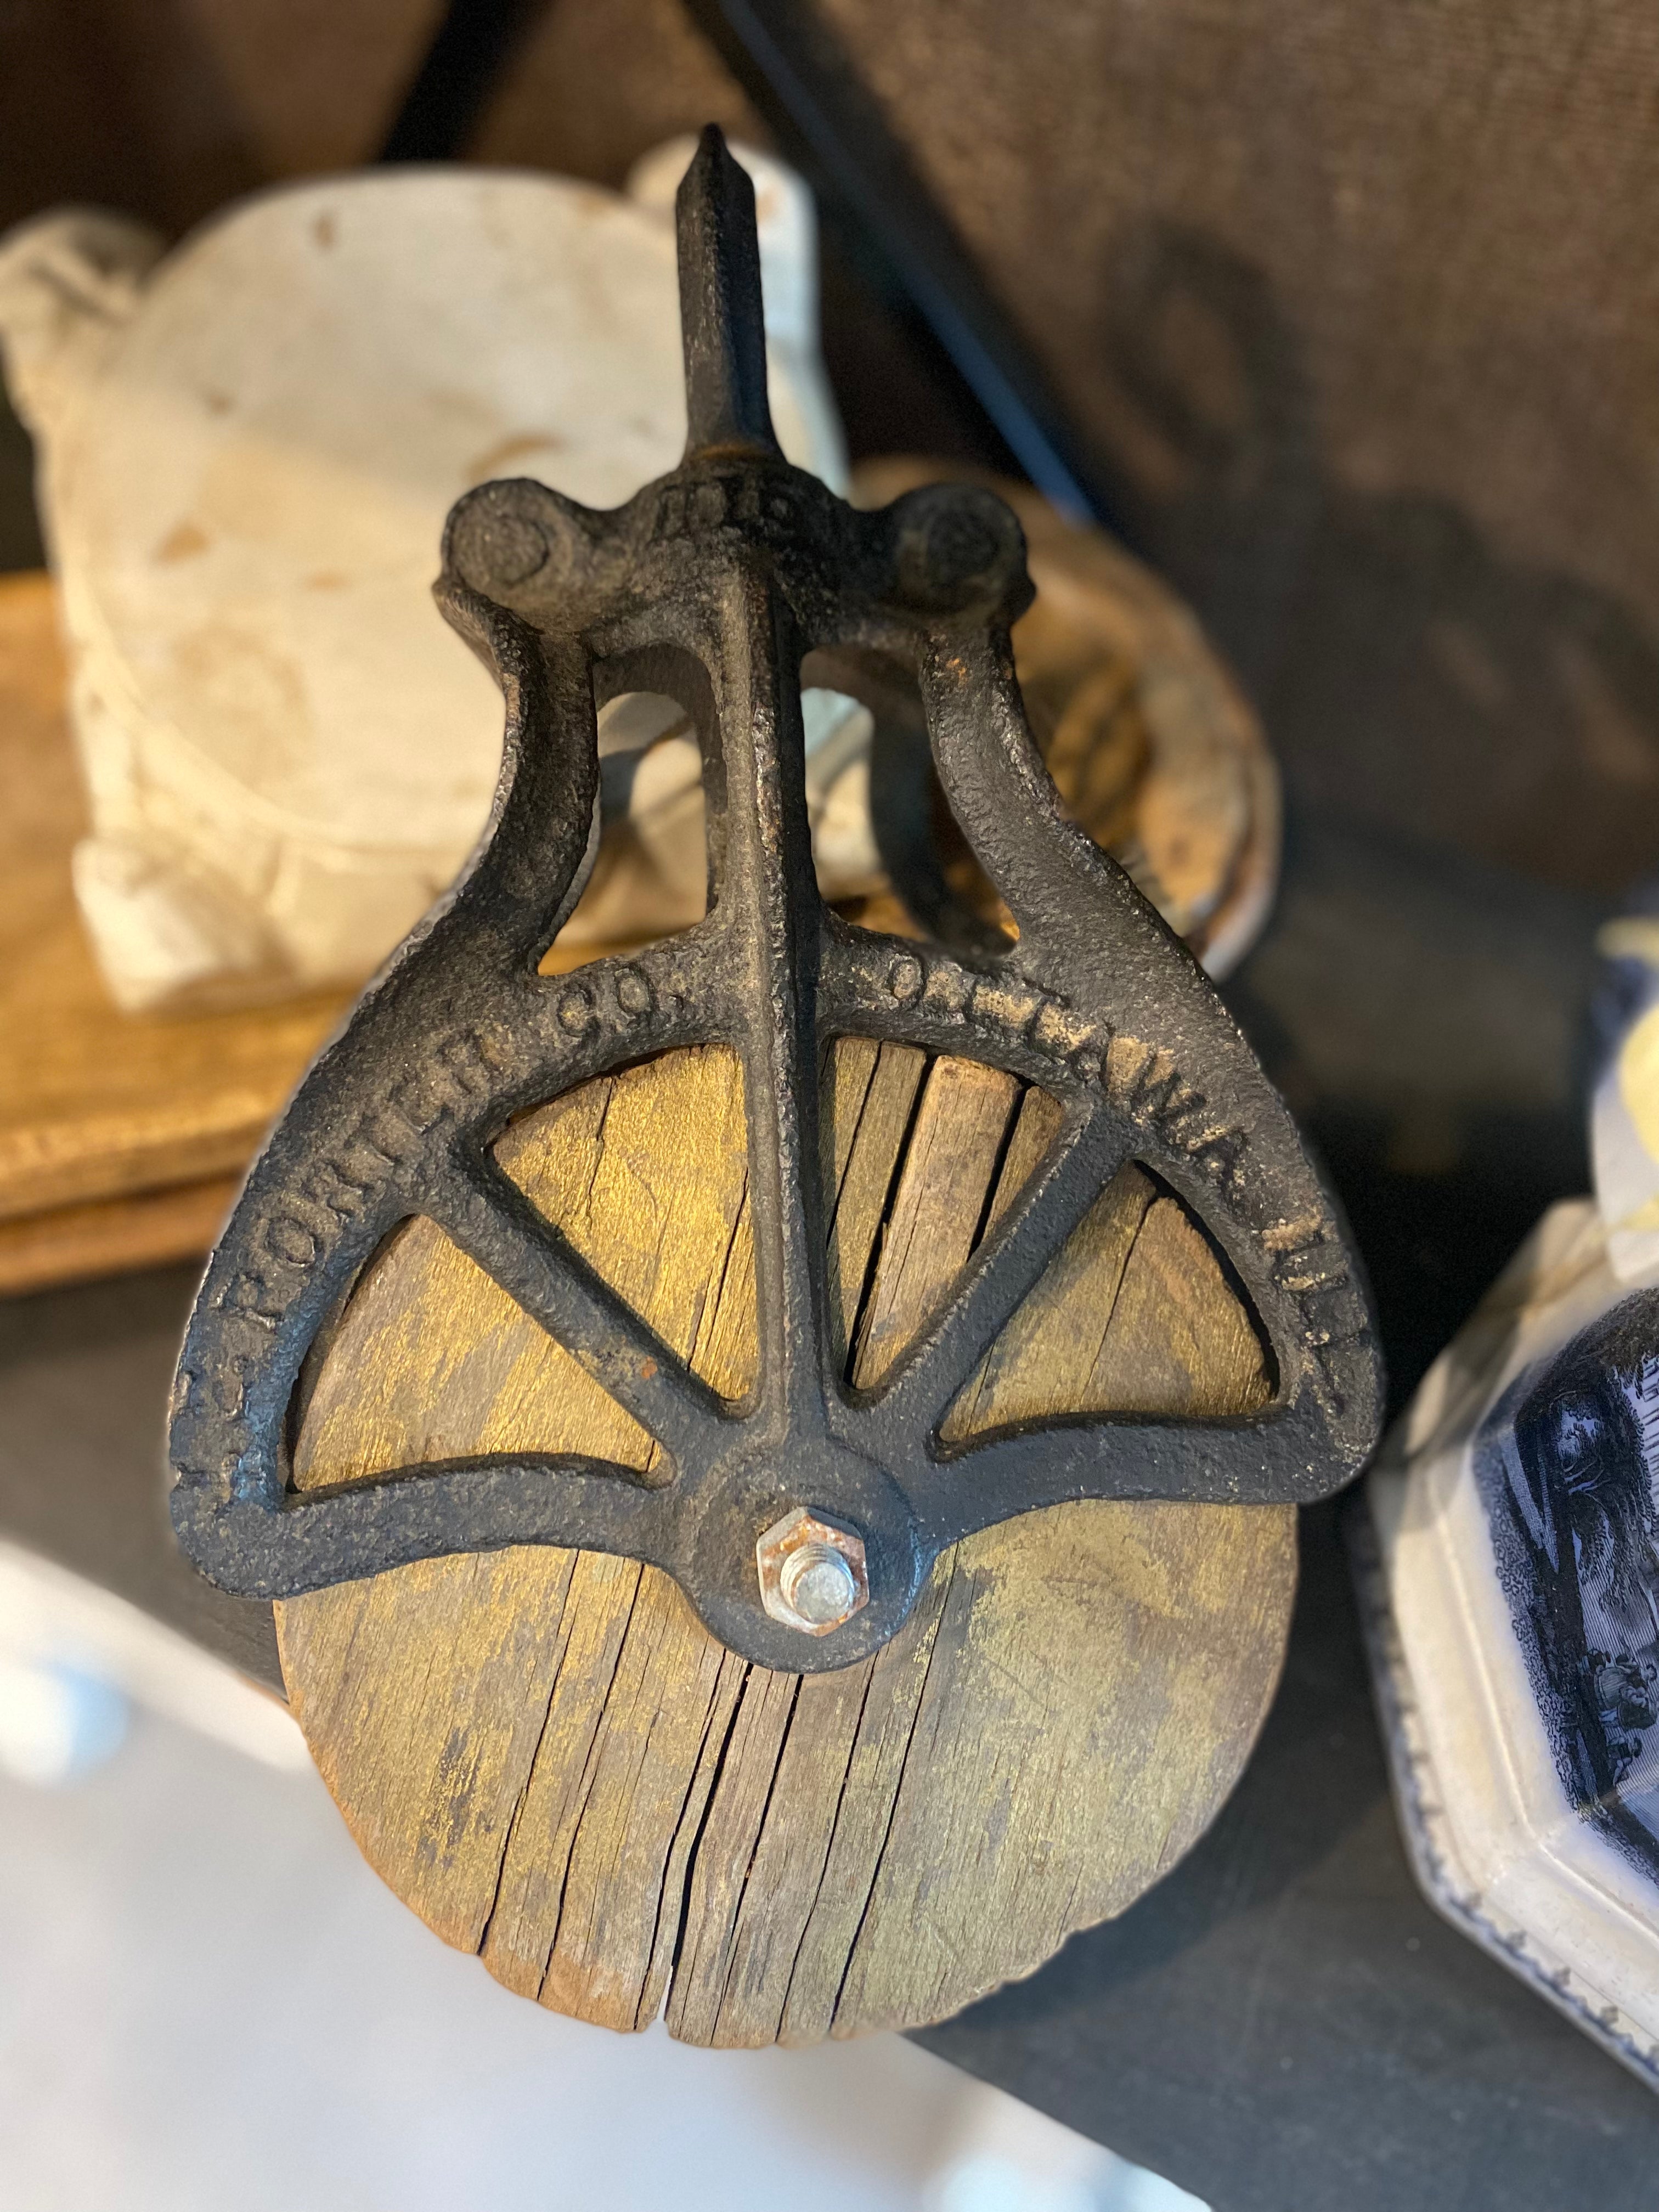 Primitive Antique Wood and Steel Pulley J E Porter Ottawa IL The Mustard Seed Collection, The Seed